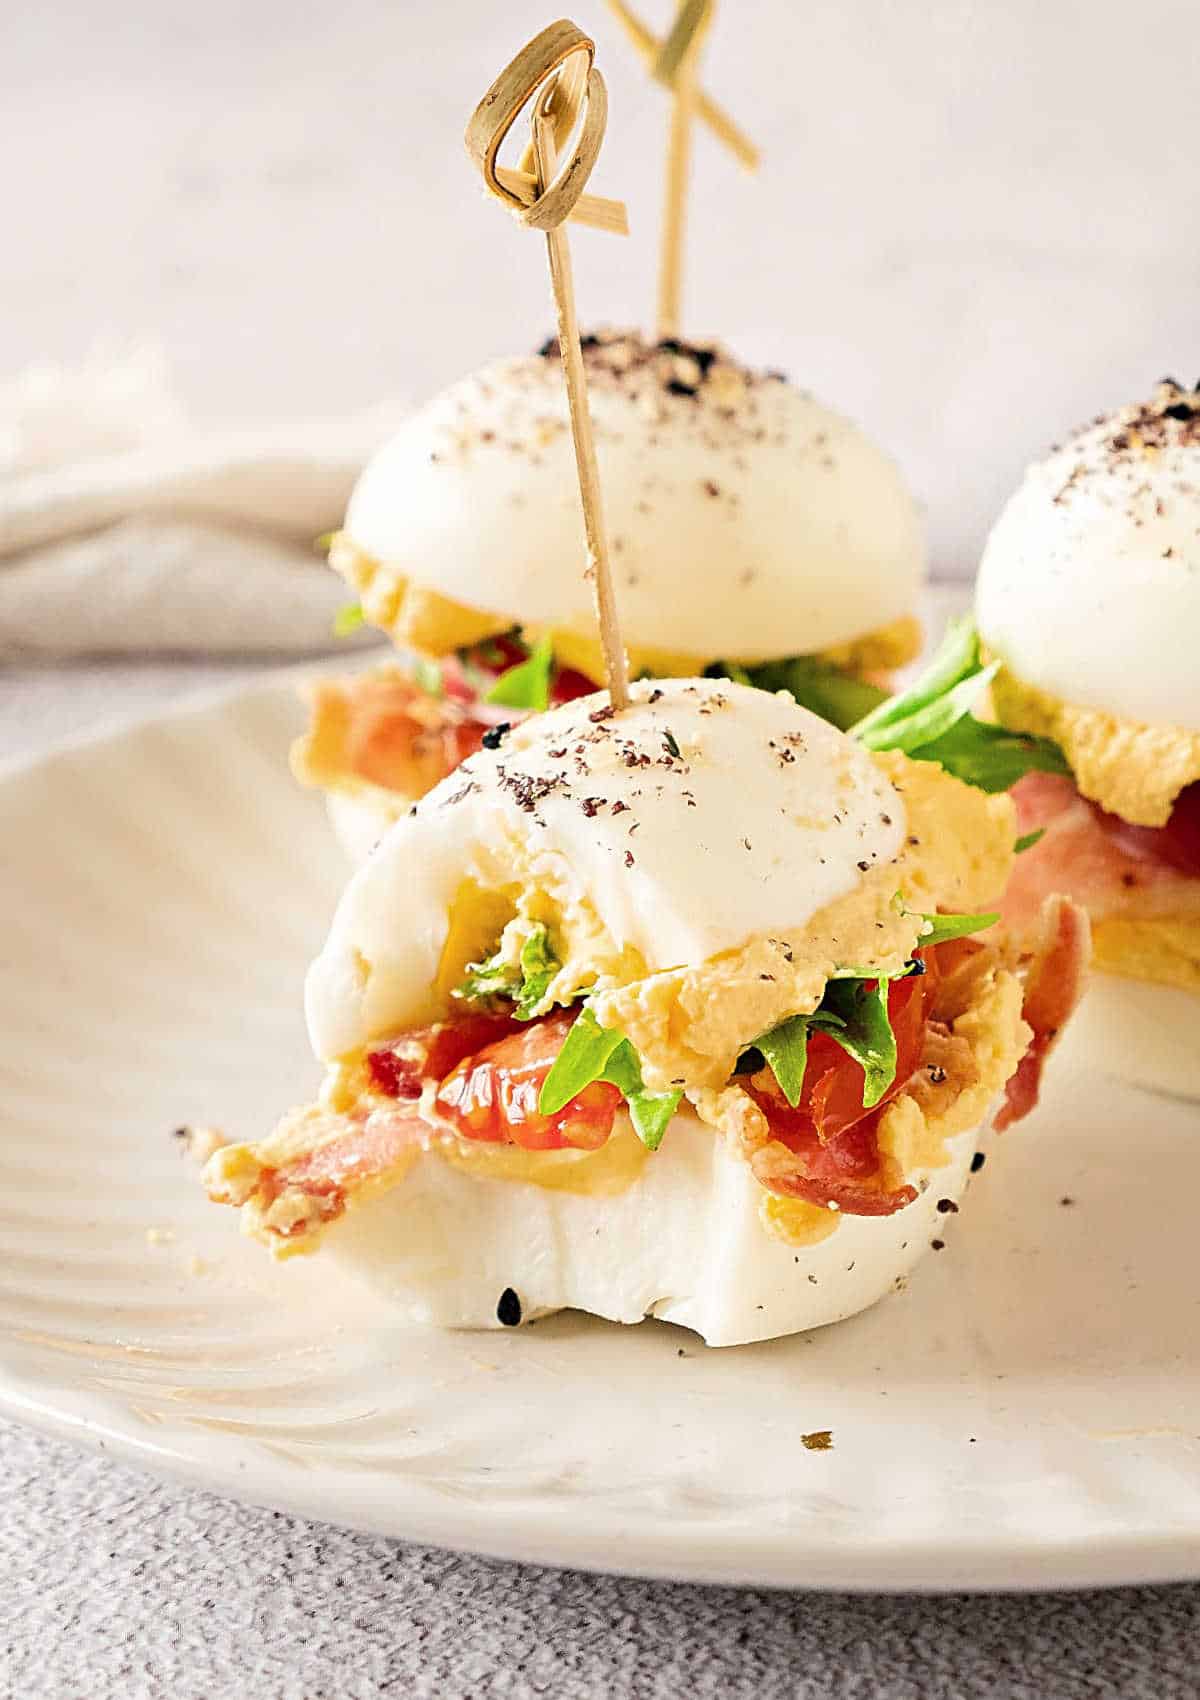 Bitten skewered BLT deviled egg sandwiches on a white plate. White surface and background.